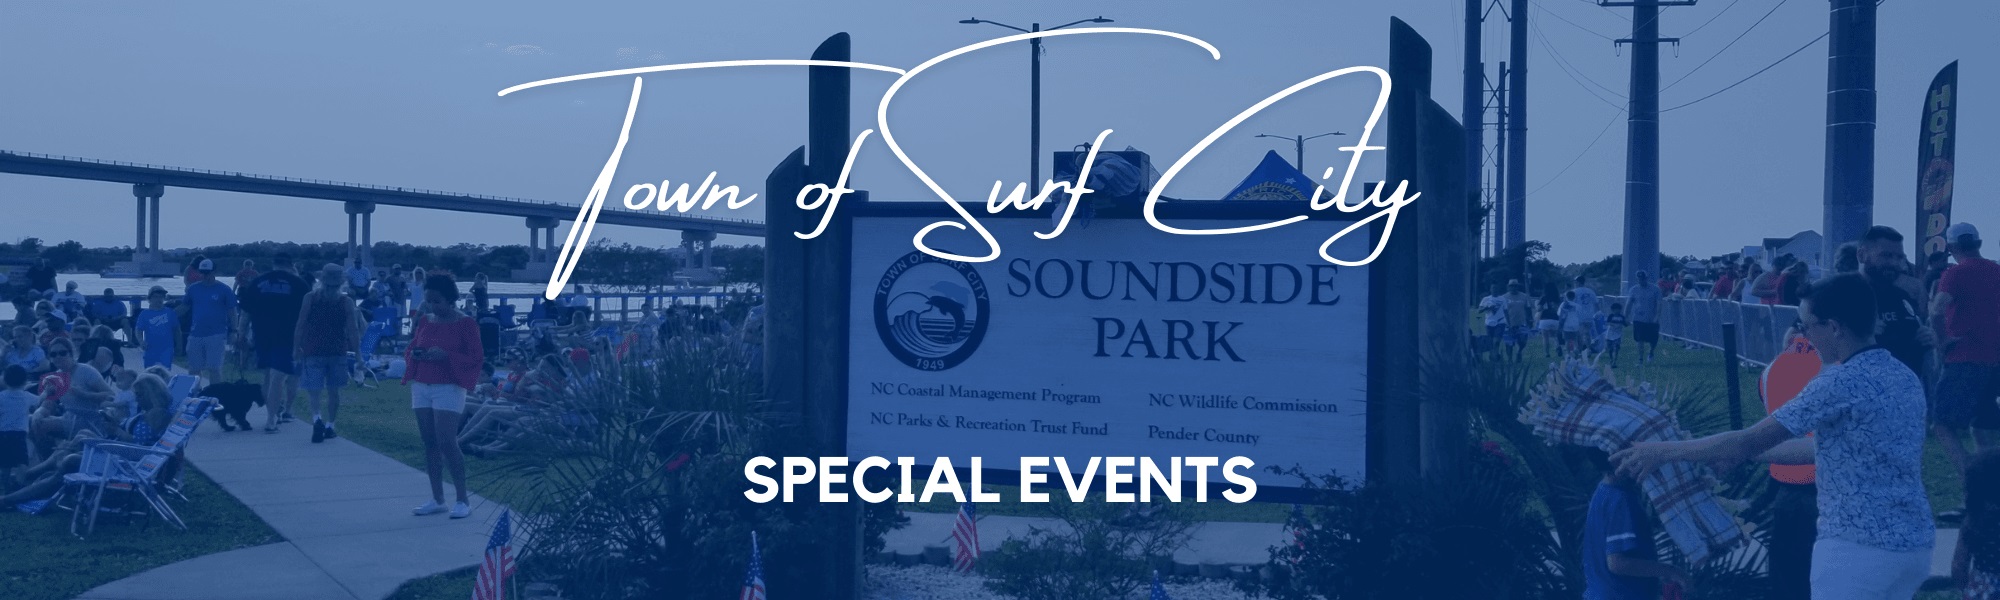 Surf City Expo at the Park